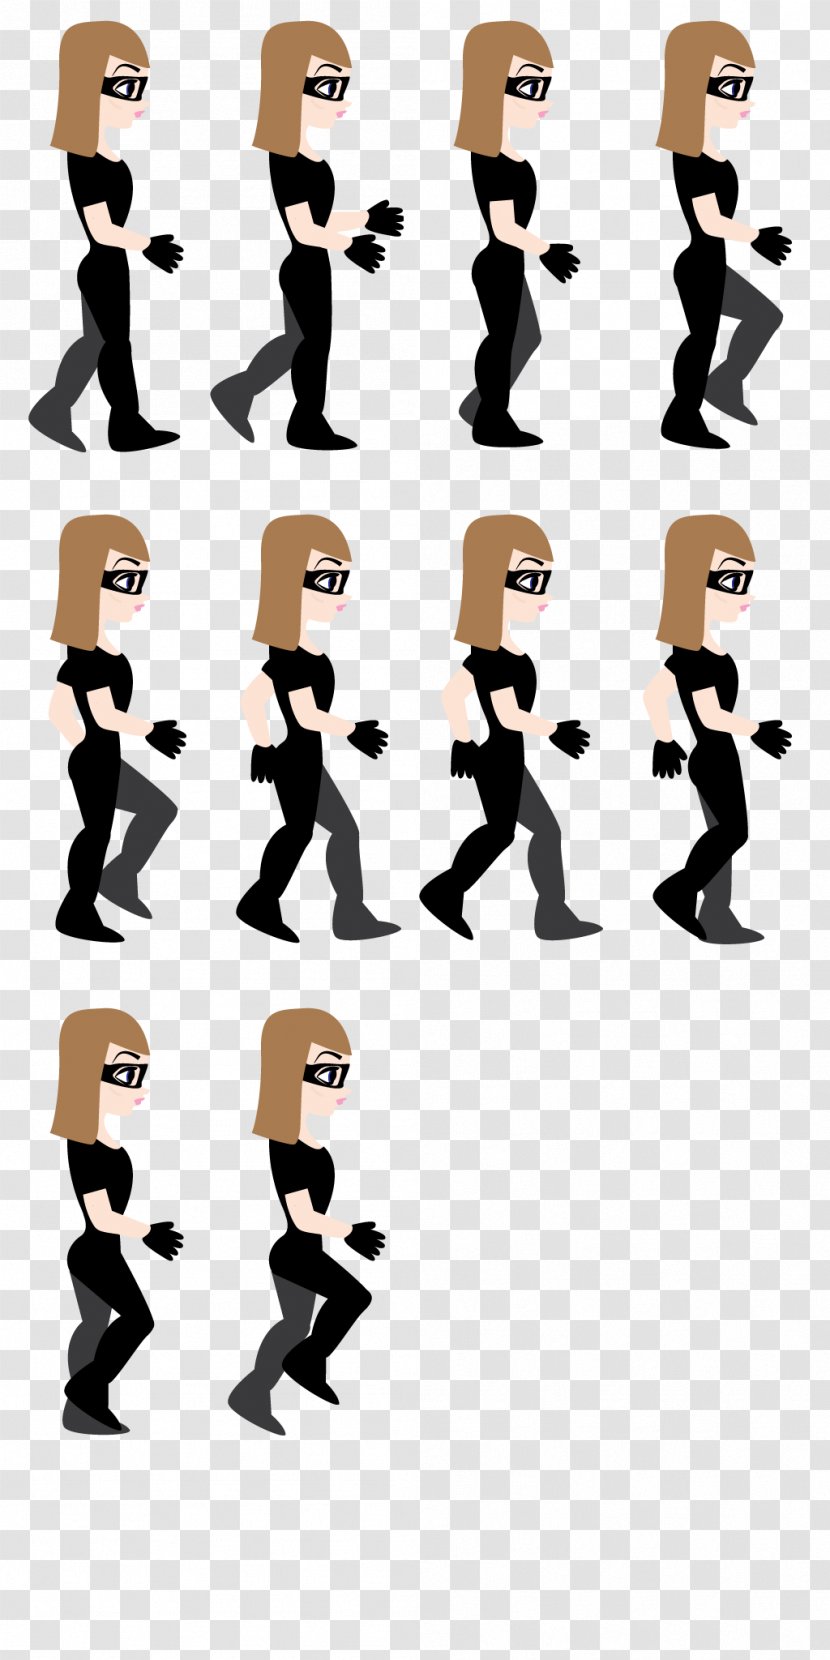 Walk Cycle Walking Animation Sprite Human - Knee - Silhouette Transparent PNG